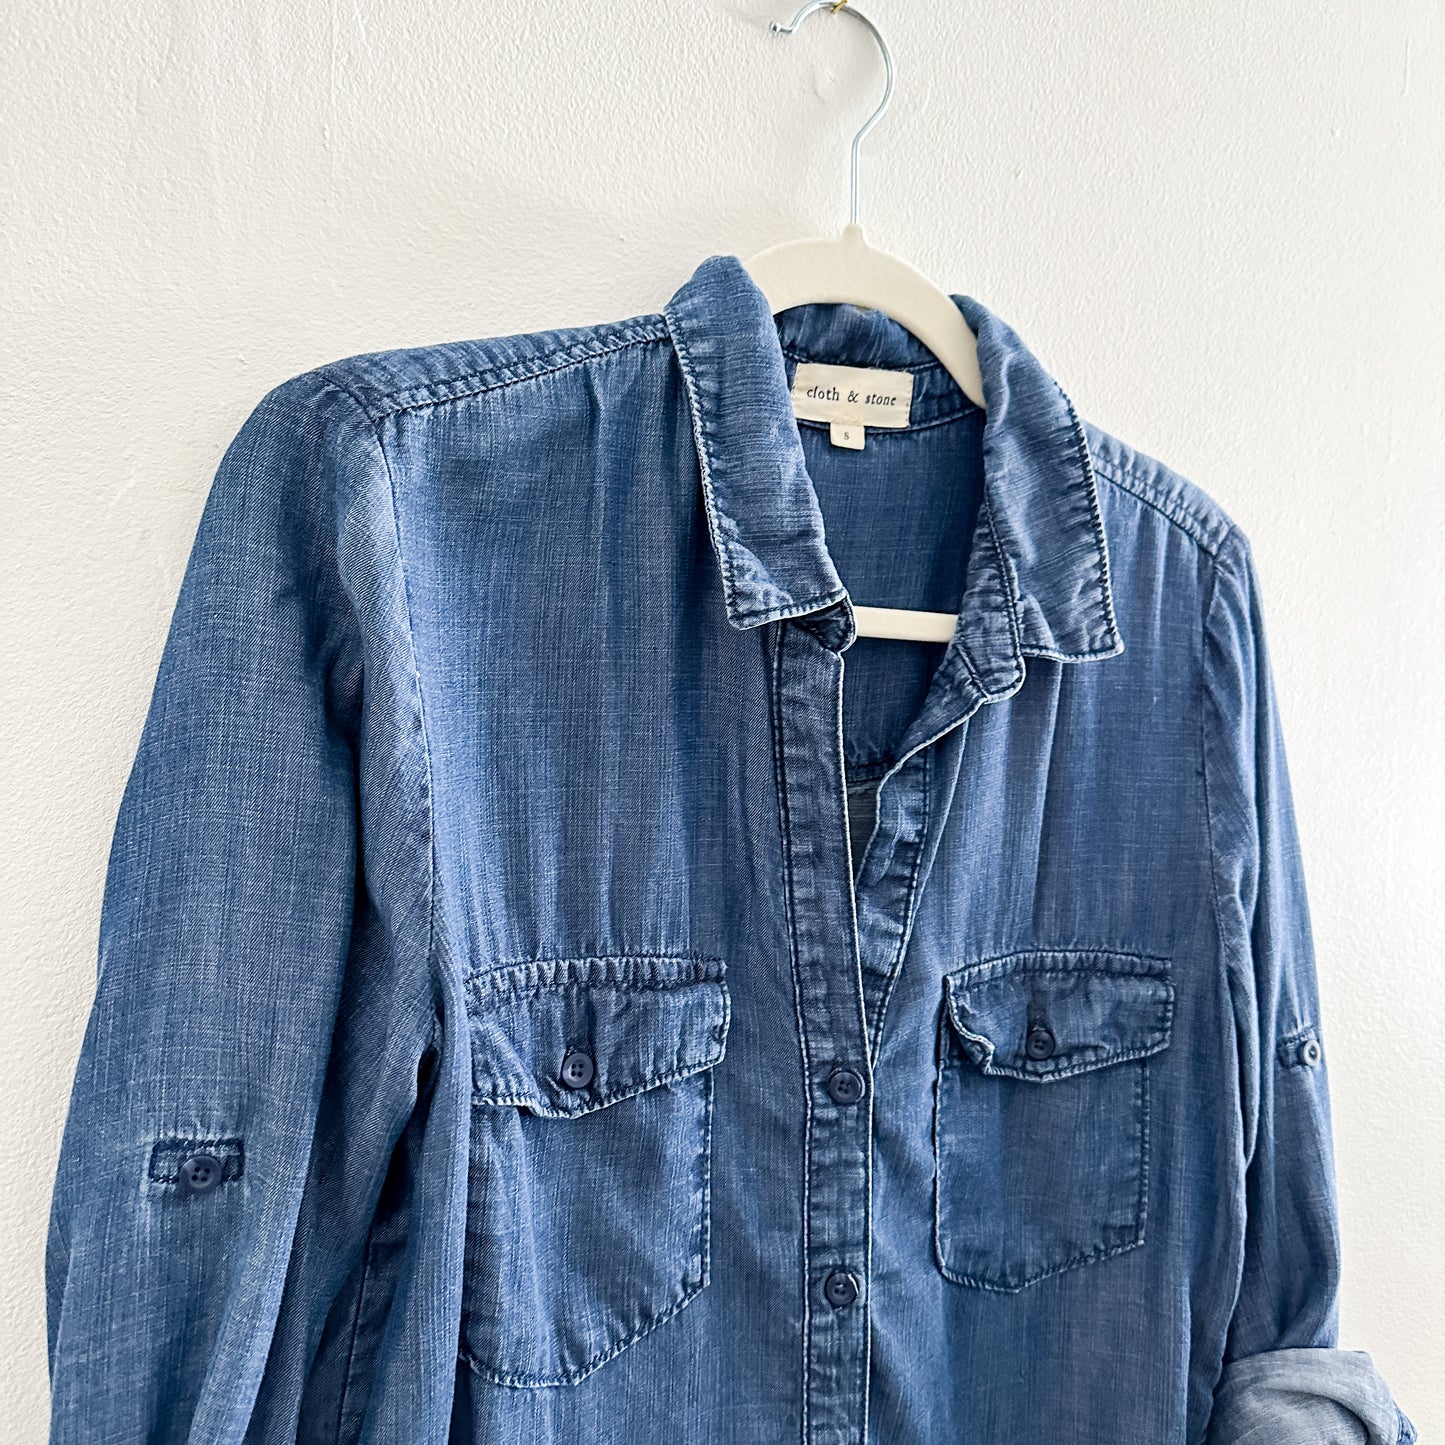 Dark Blue Popover Chambray Top (fits S)